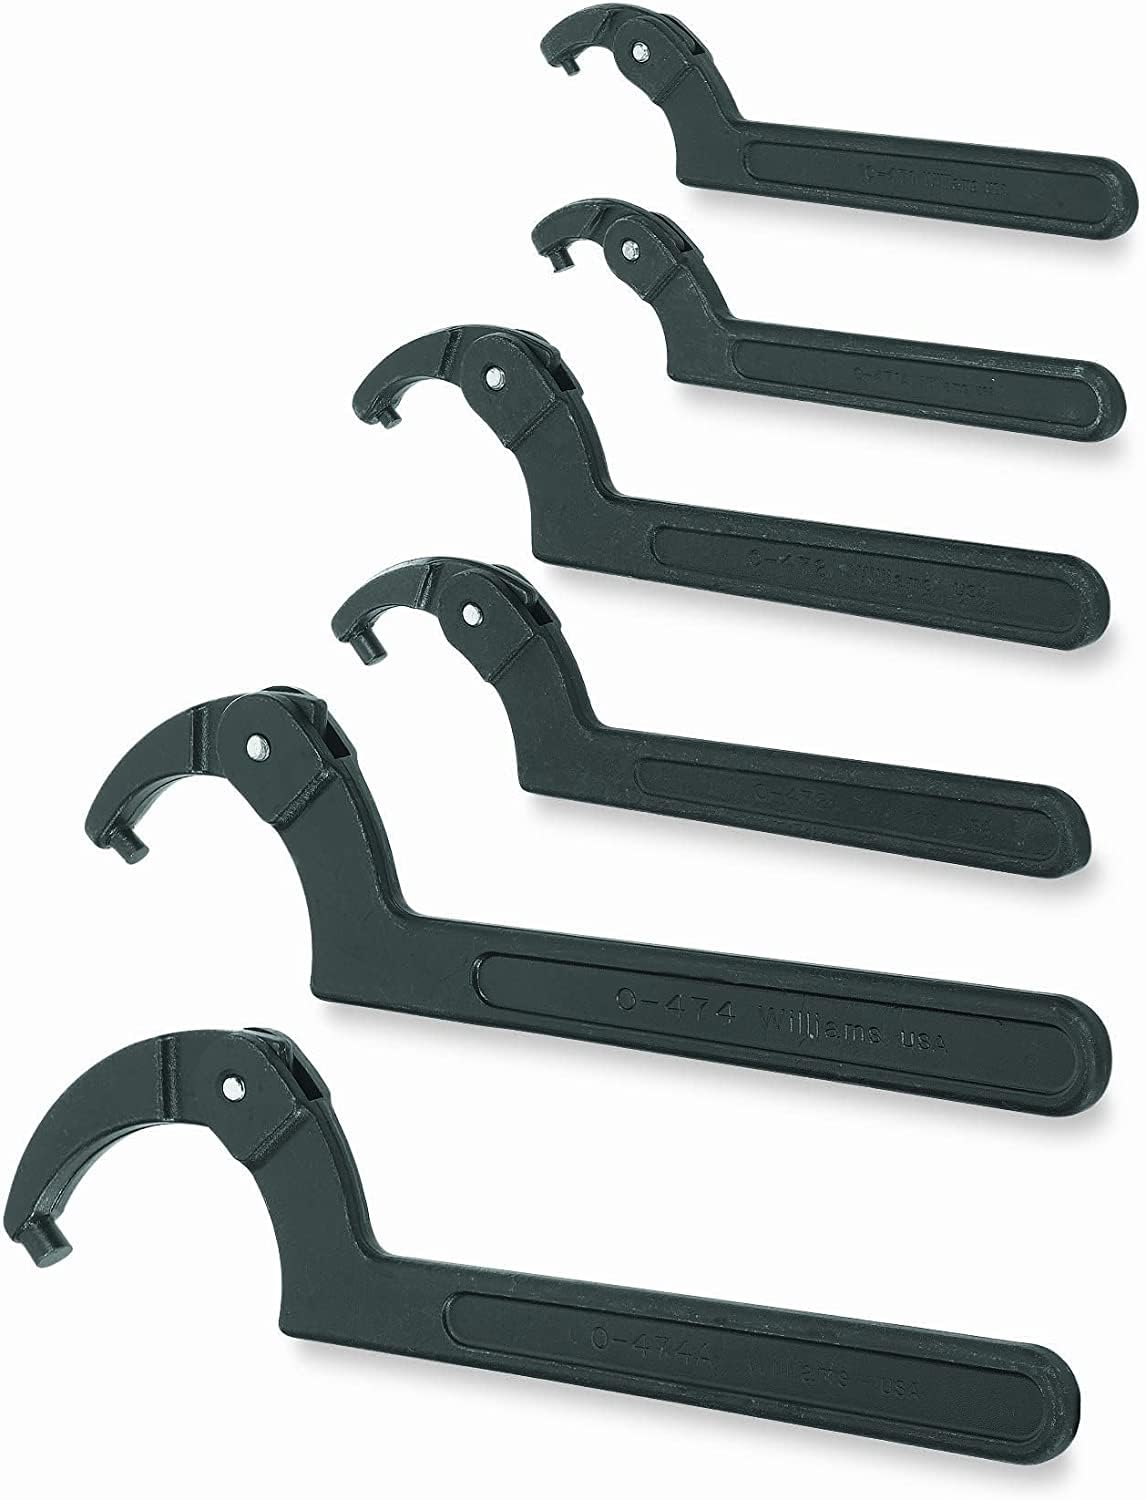 Top Spanner Wrench Brands: Reliable Tools for a Variety of Applications插图